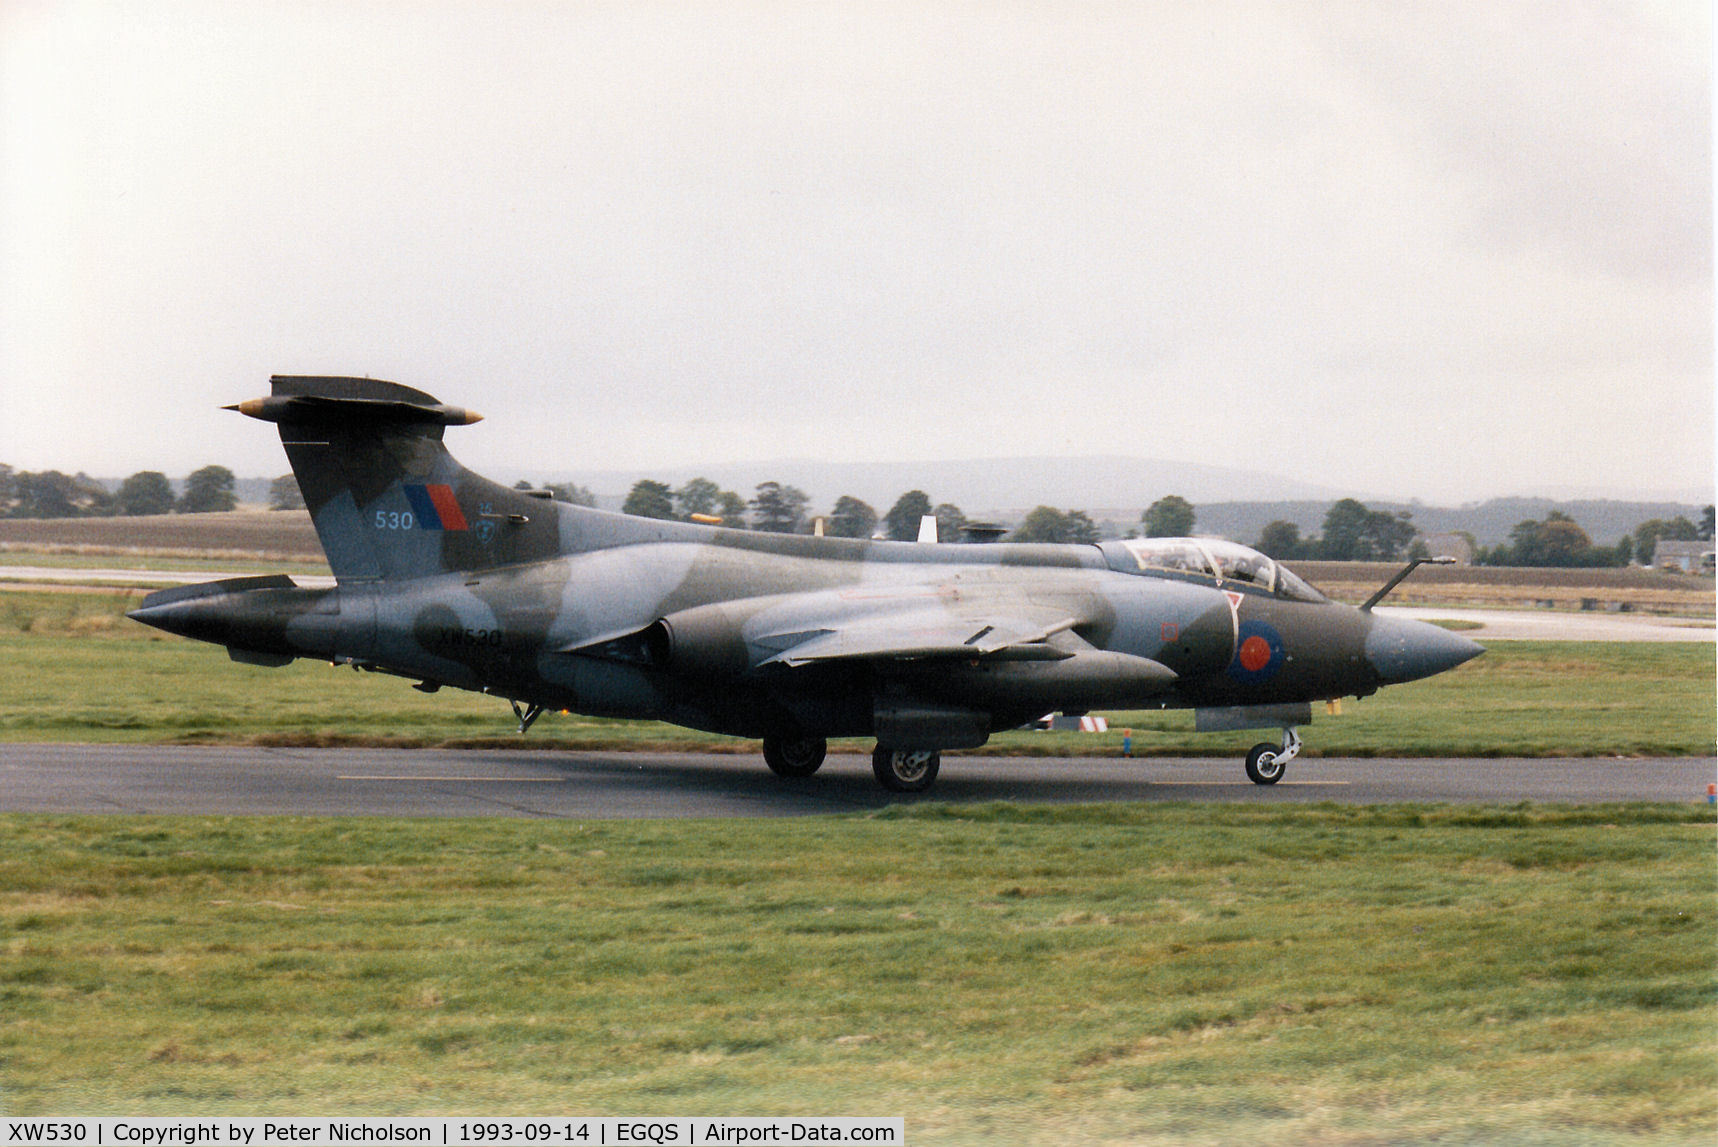 XW530, 1970 Hawker Siddeley Buccaneer S.2B C/N B3-06-69, Buccaneer S.2B of 12 Squadron taxying to Runway 05 at RAF Lossiemouth in September 1993.